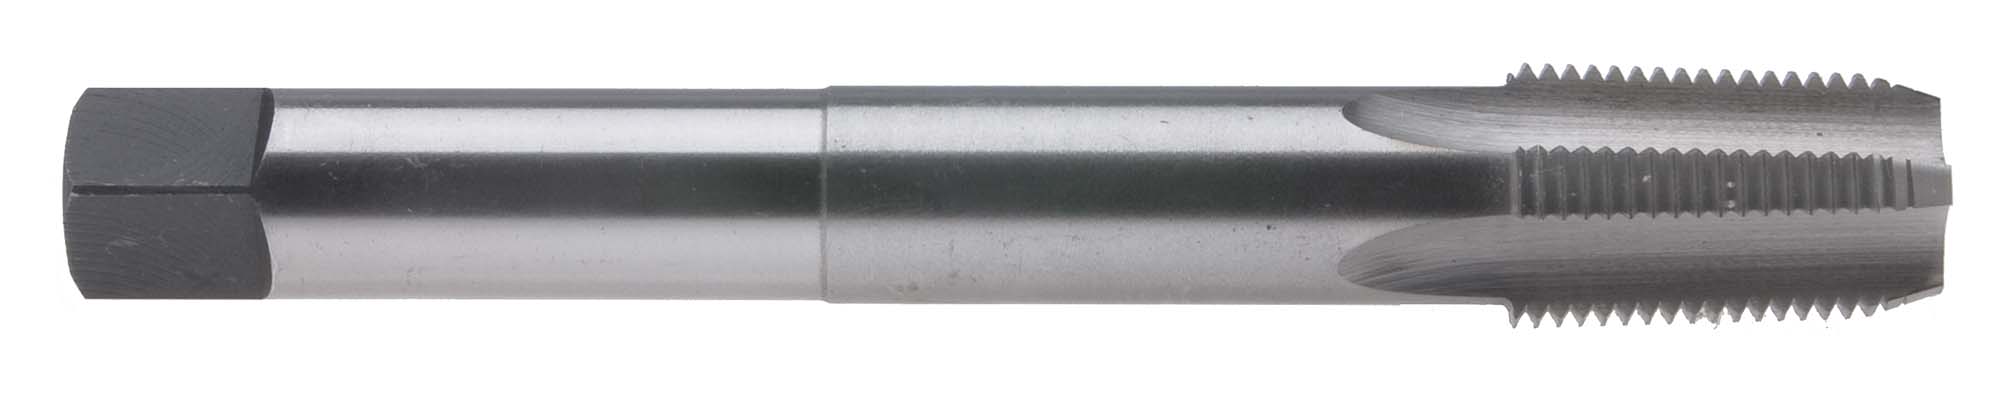 1/8"-27 6" Long National Pipe Taper High Speed Steel Pipe Tap